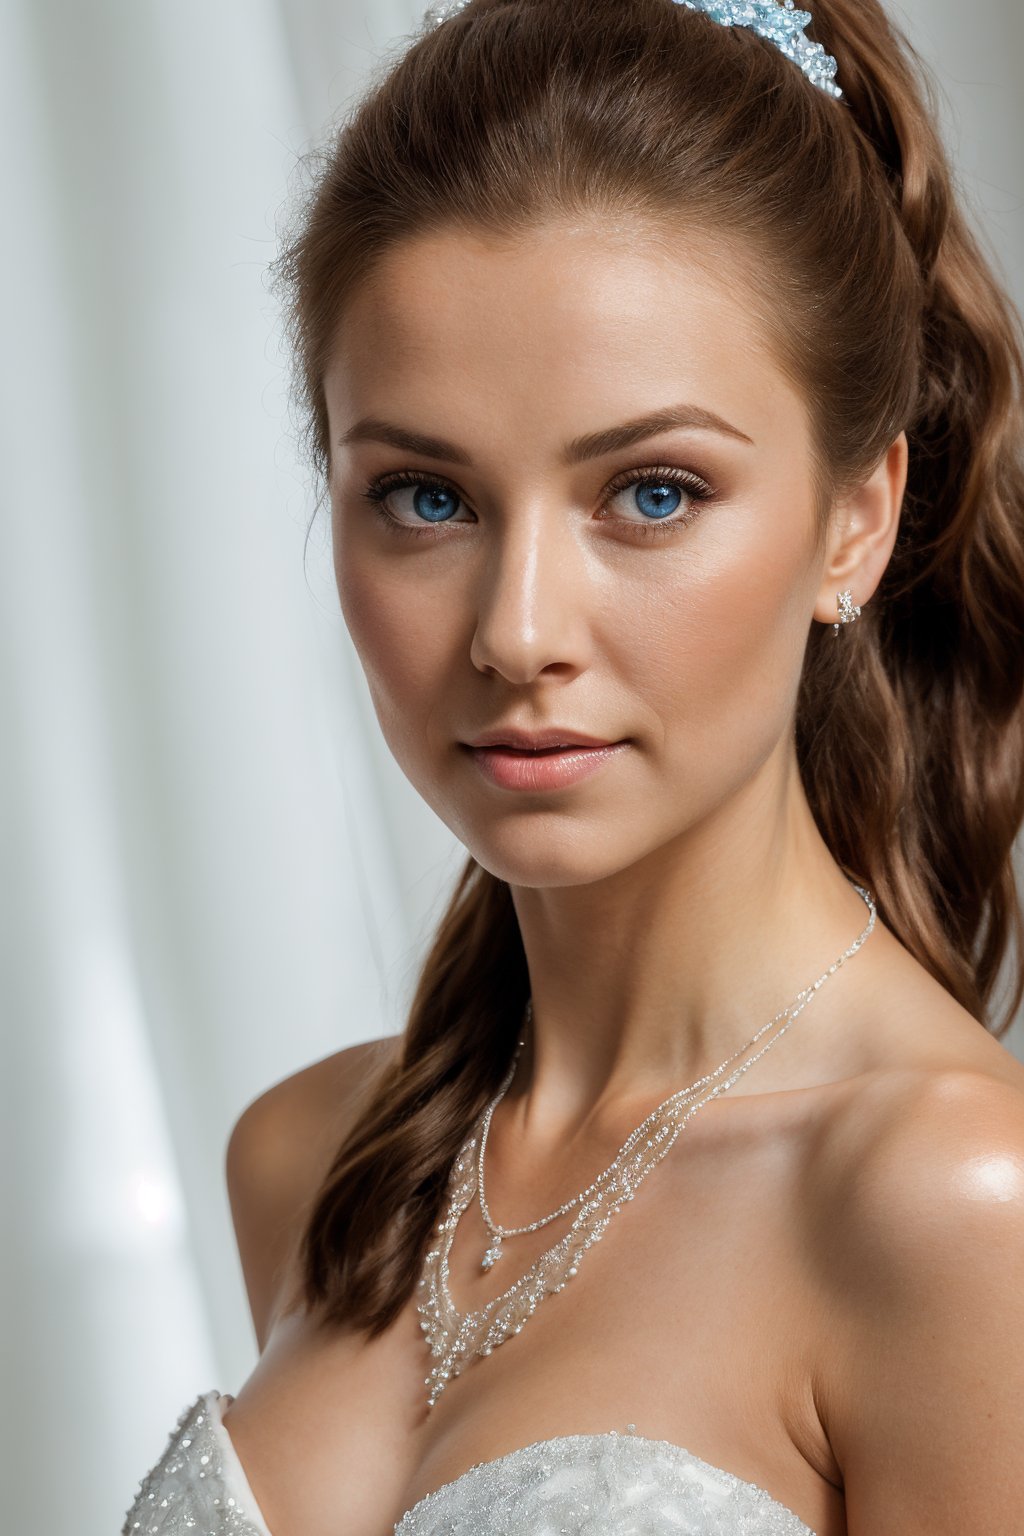 young wife,  spectacular tight body,  brown hair with ponytail,  wear white gorgeous wedding dress,  necklace,  hair accessories,  rim lighting,  studio lighting,  looking at the camera,  sharp focus,  highly detailed glossy blue eyes